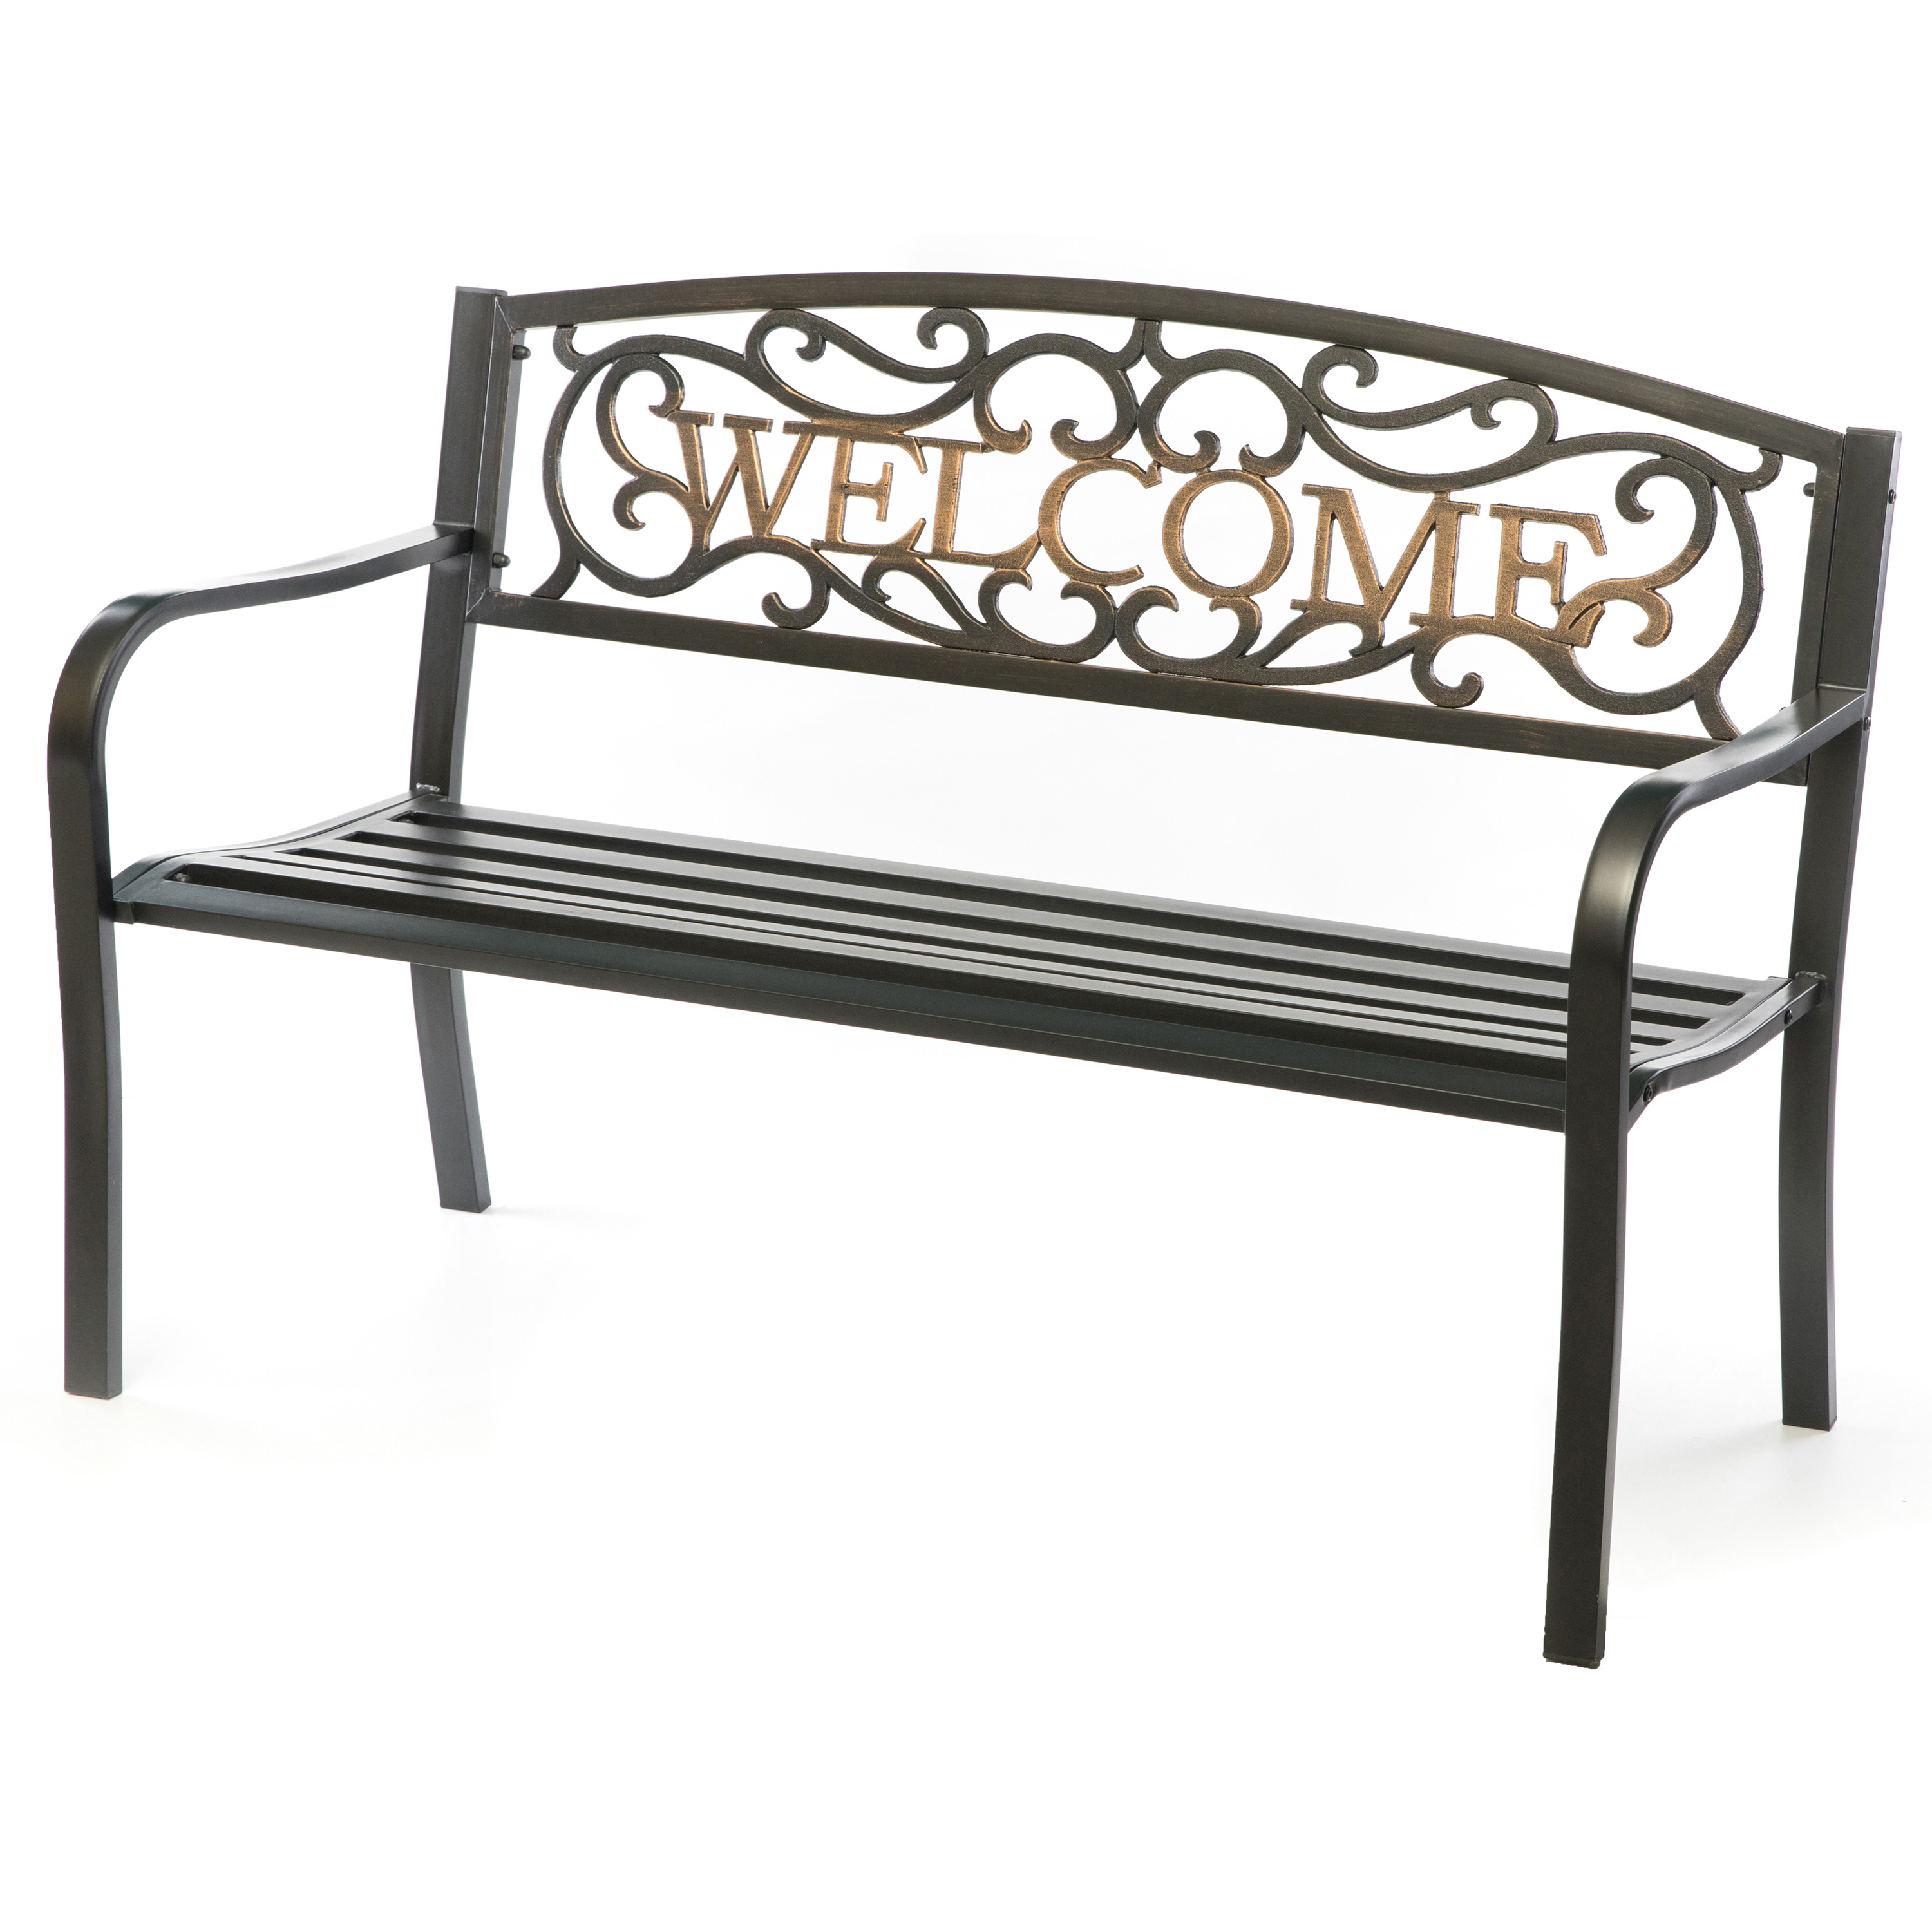 Steel Outdoor Patio Garden Park Seating Bench With Cast Iron Welcome Backrest, Front Porch Yard Bench Lawn Decor